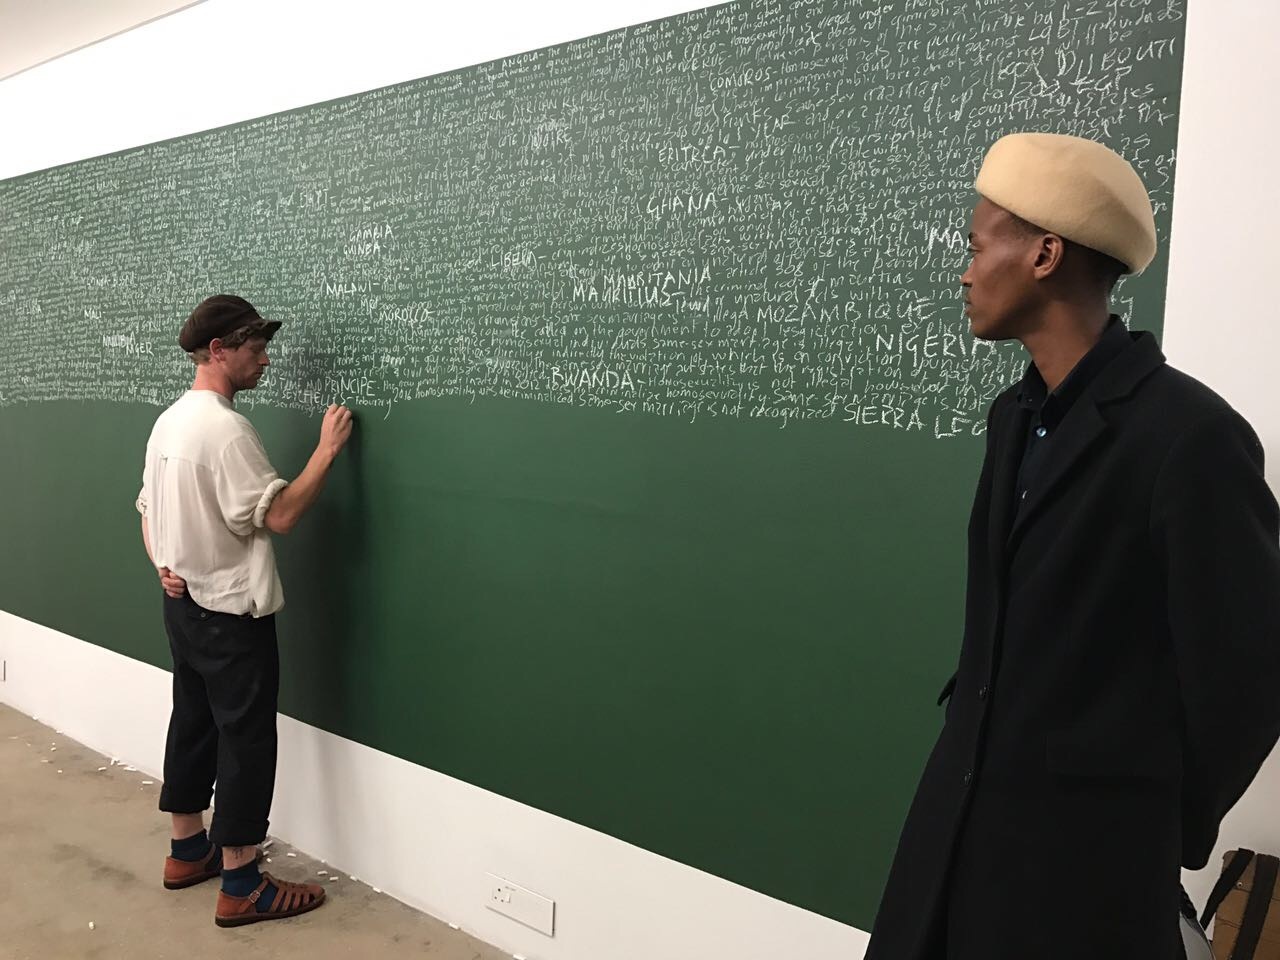 Photograph of Luvuyo Nyawose and Brett Charles Seiler's performance installation 'Reading Homophobia'. On the right, Nyawose is standing. On the left, Seiler writes on a green chalkboard.
